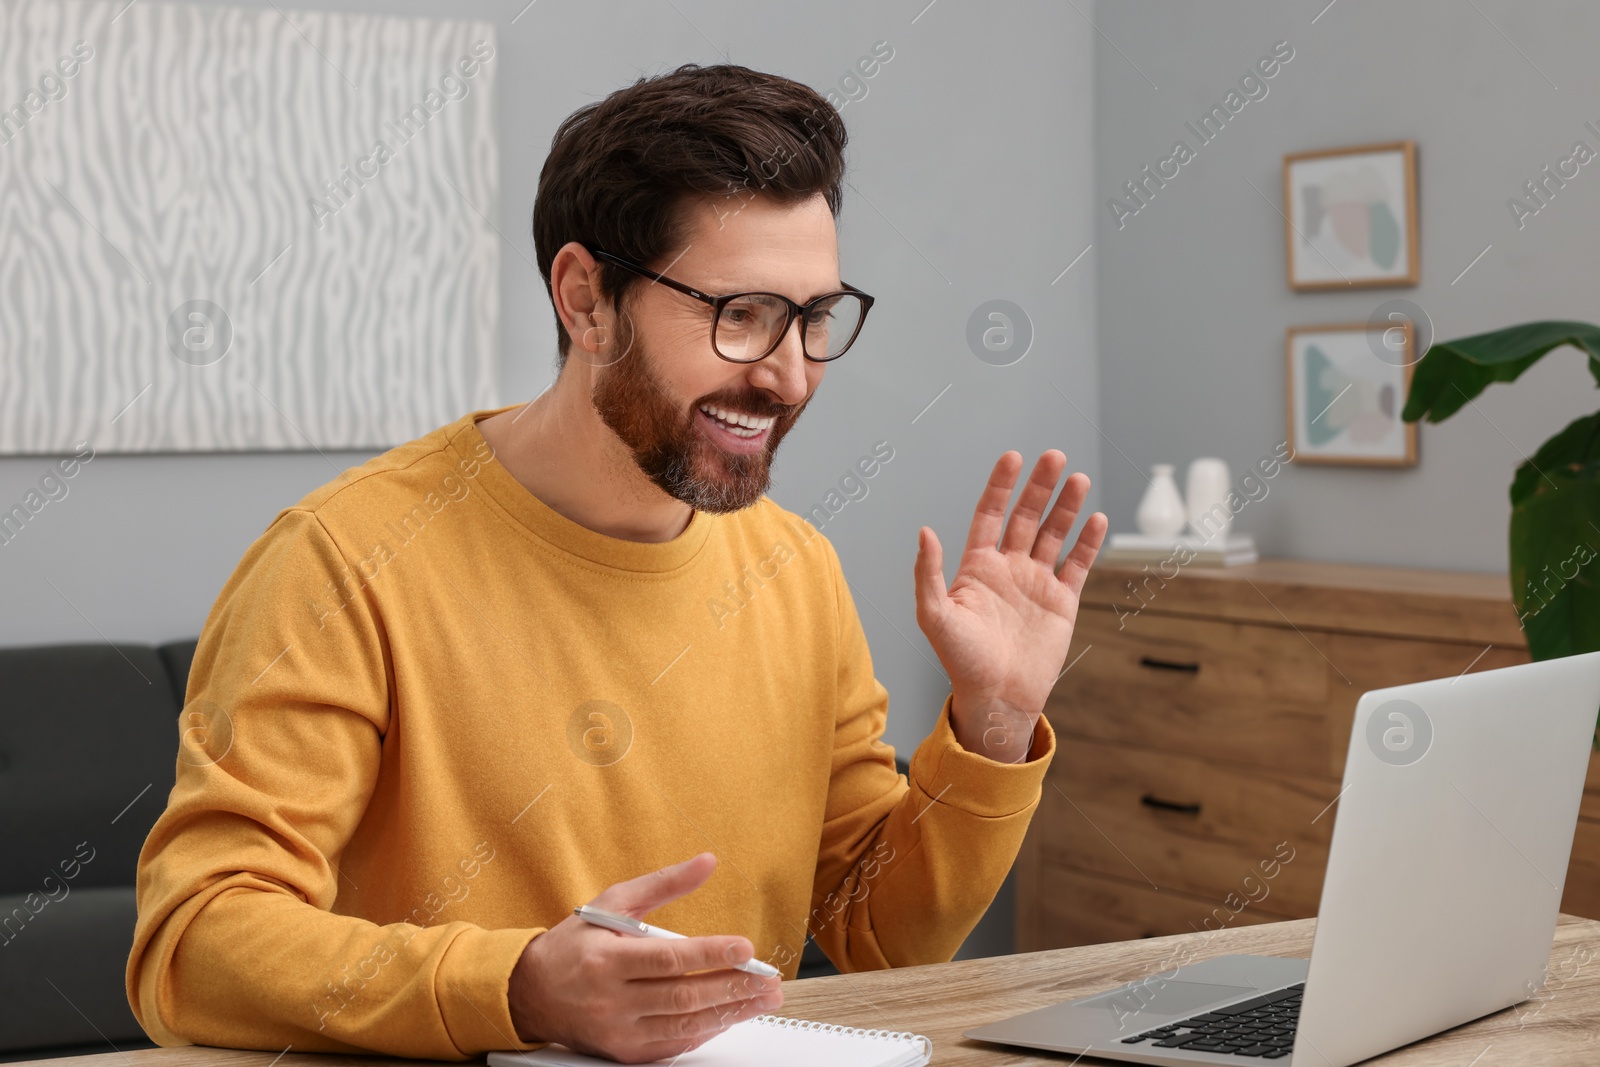 Photo of Man greeting someone during video chat via laptop at home